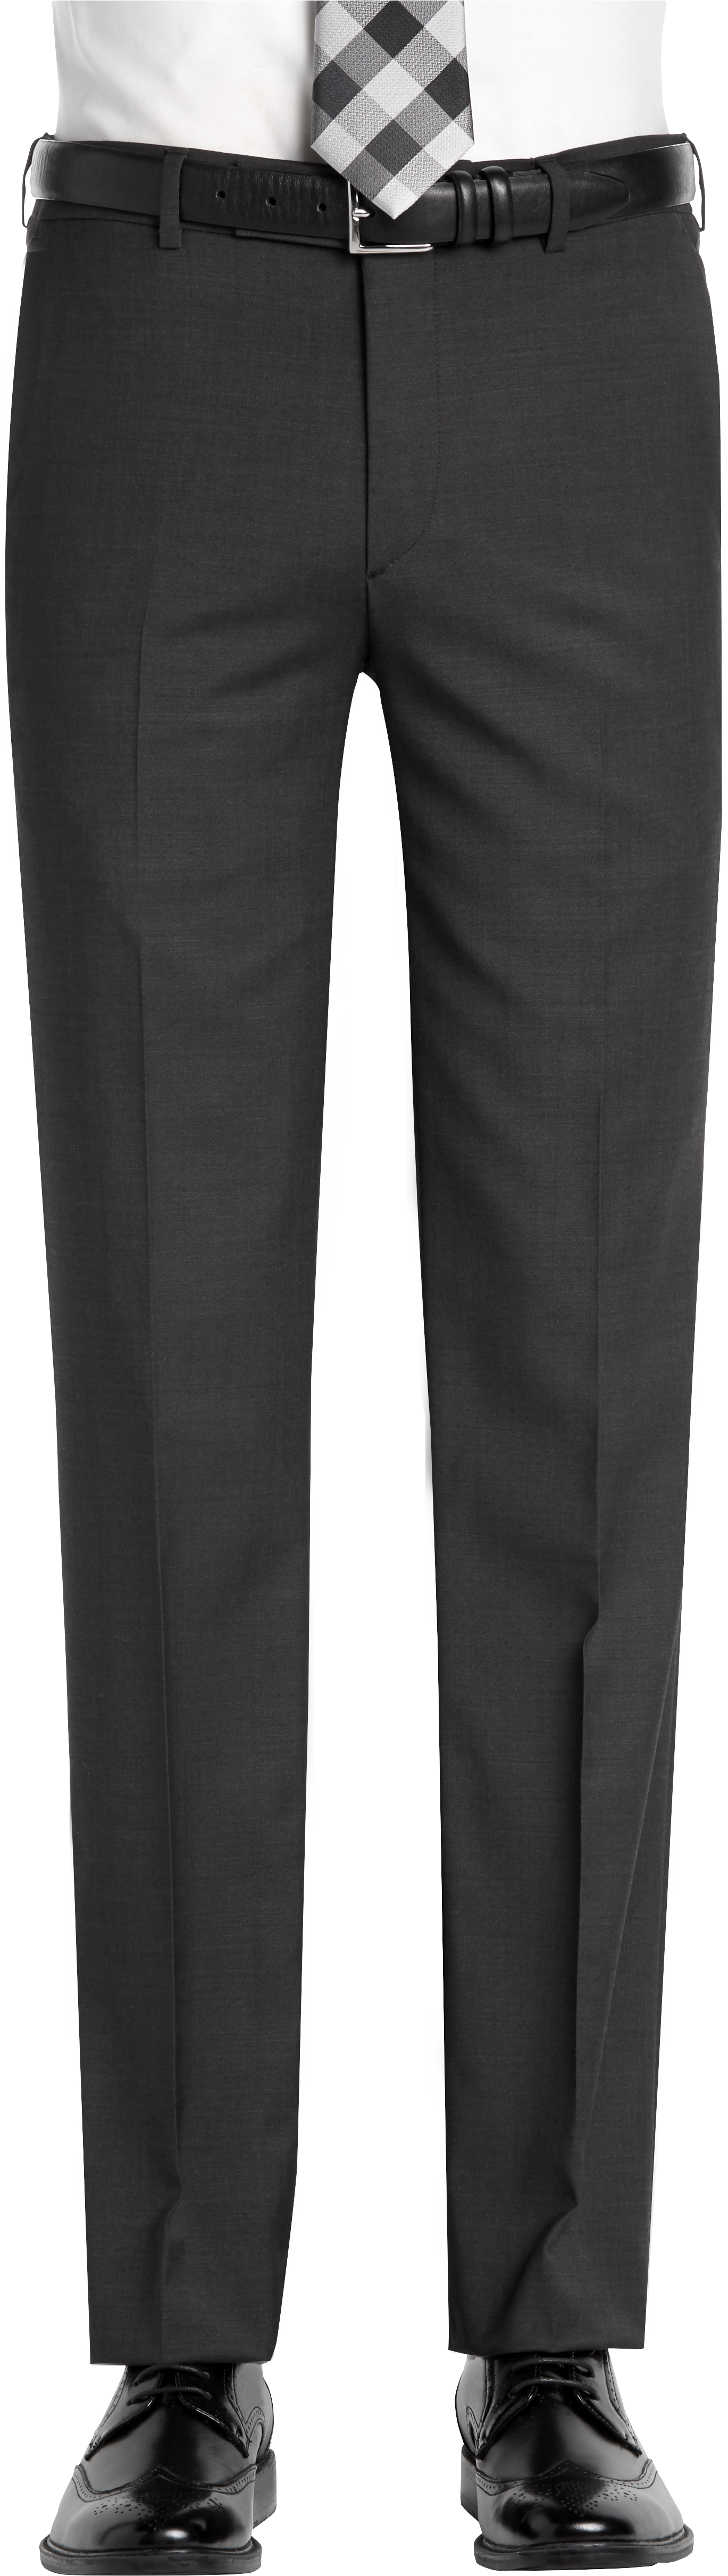 Mens Suits - Awearness Kenneth Cole AWEAR-TECH Slim Fit Suit Separates Pants, Charcoal - Men's Wearhouse